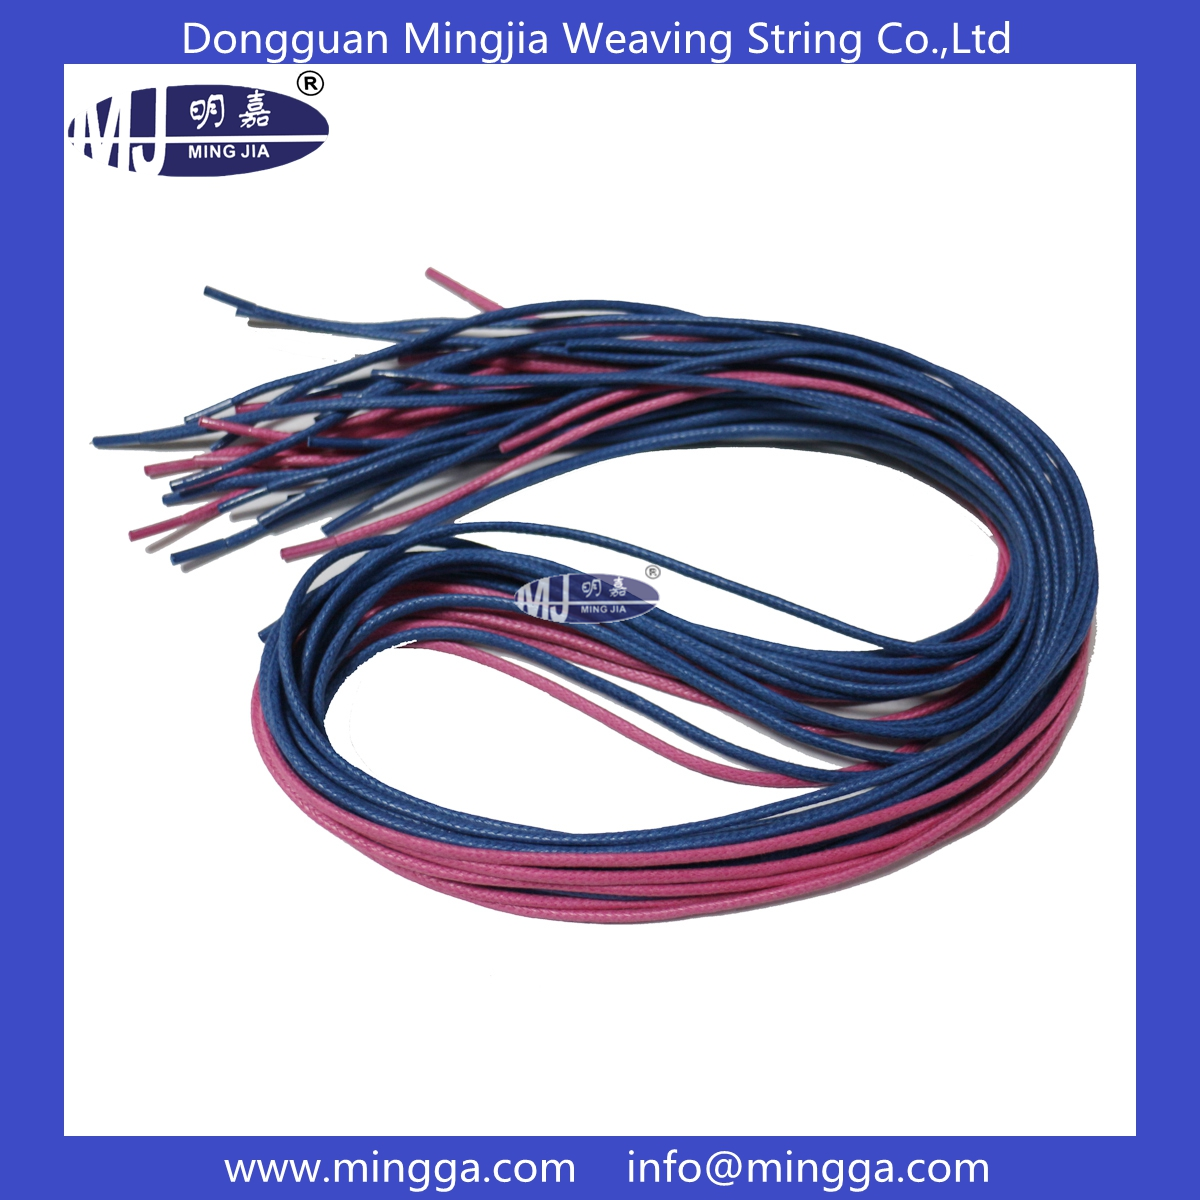 MJ-S131 4mm thin waxed shoelaces